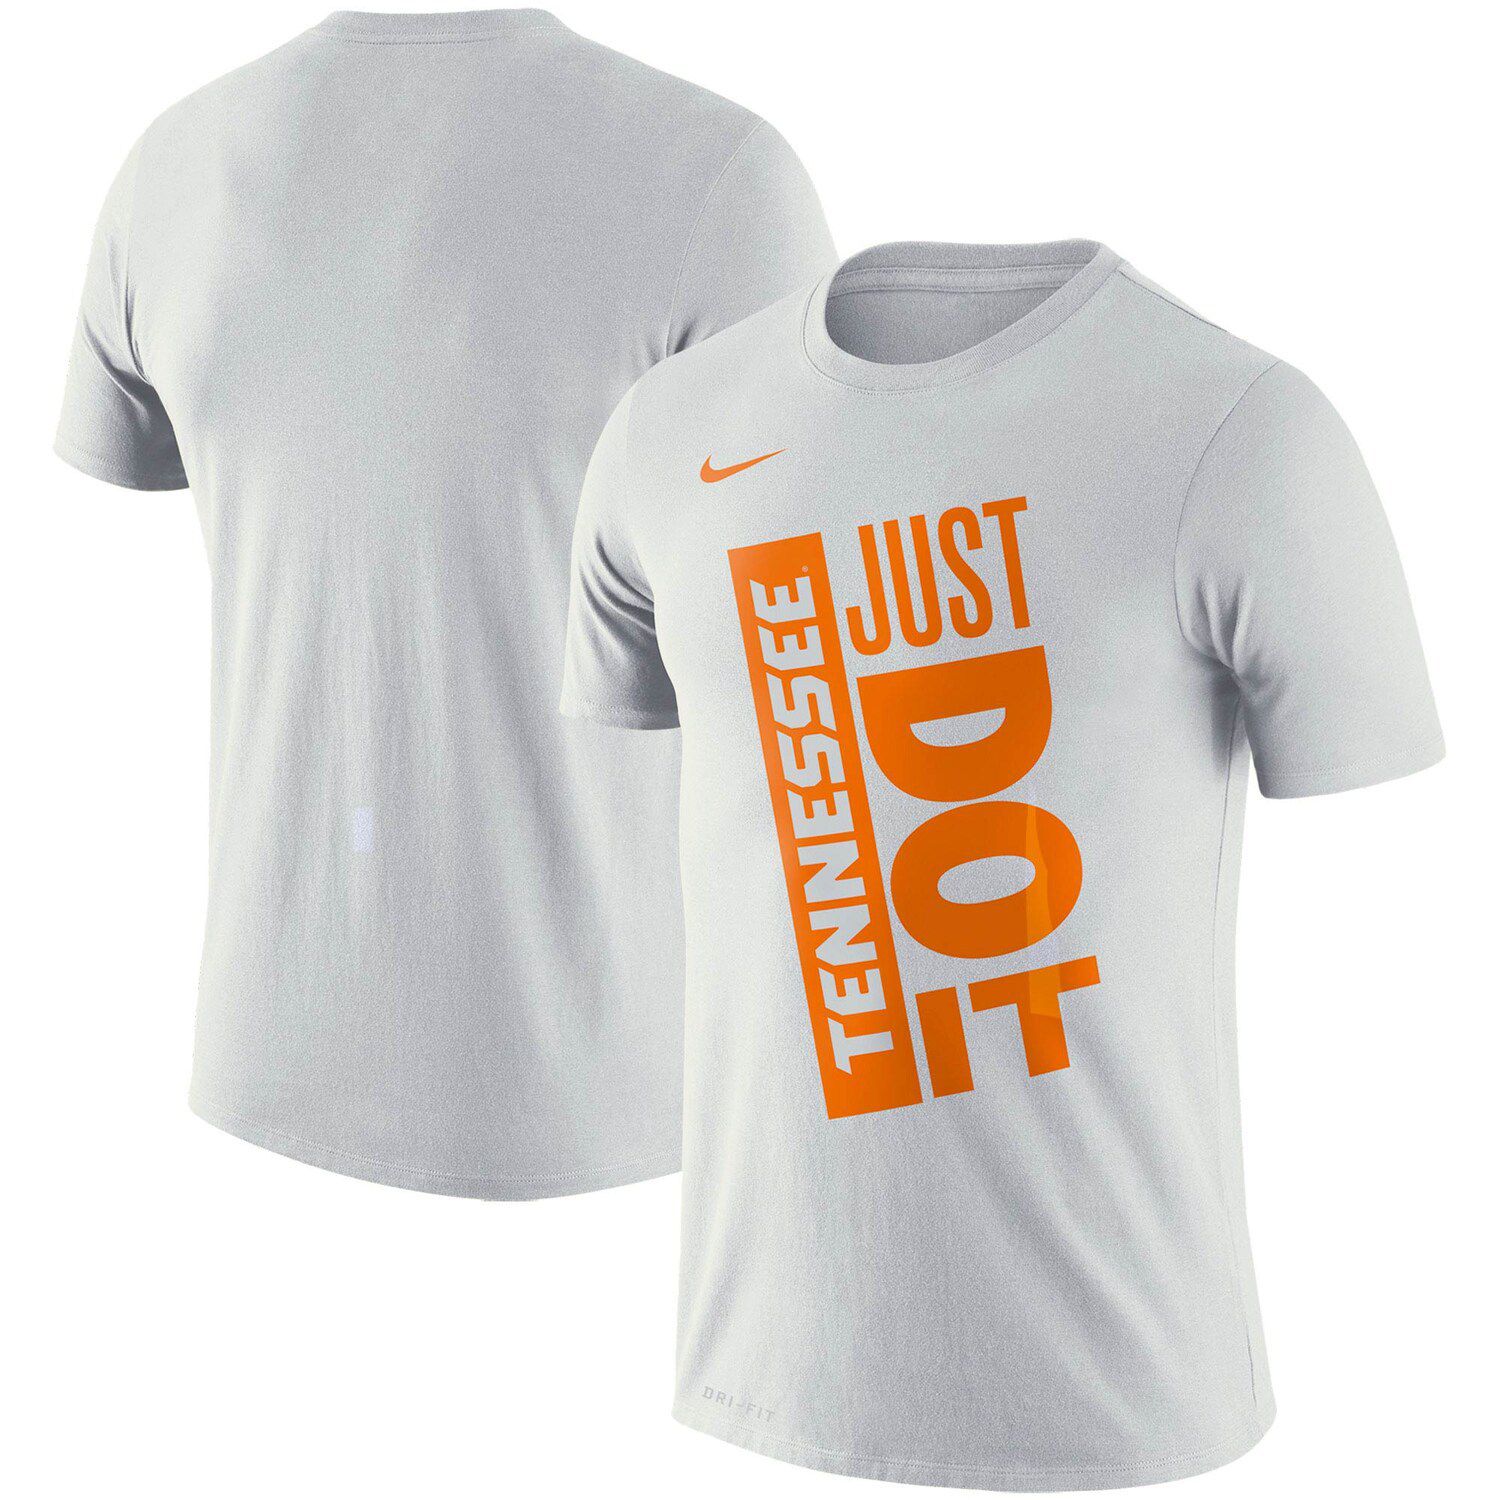 tennessee basketball jersey white